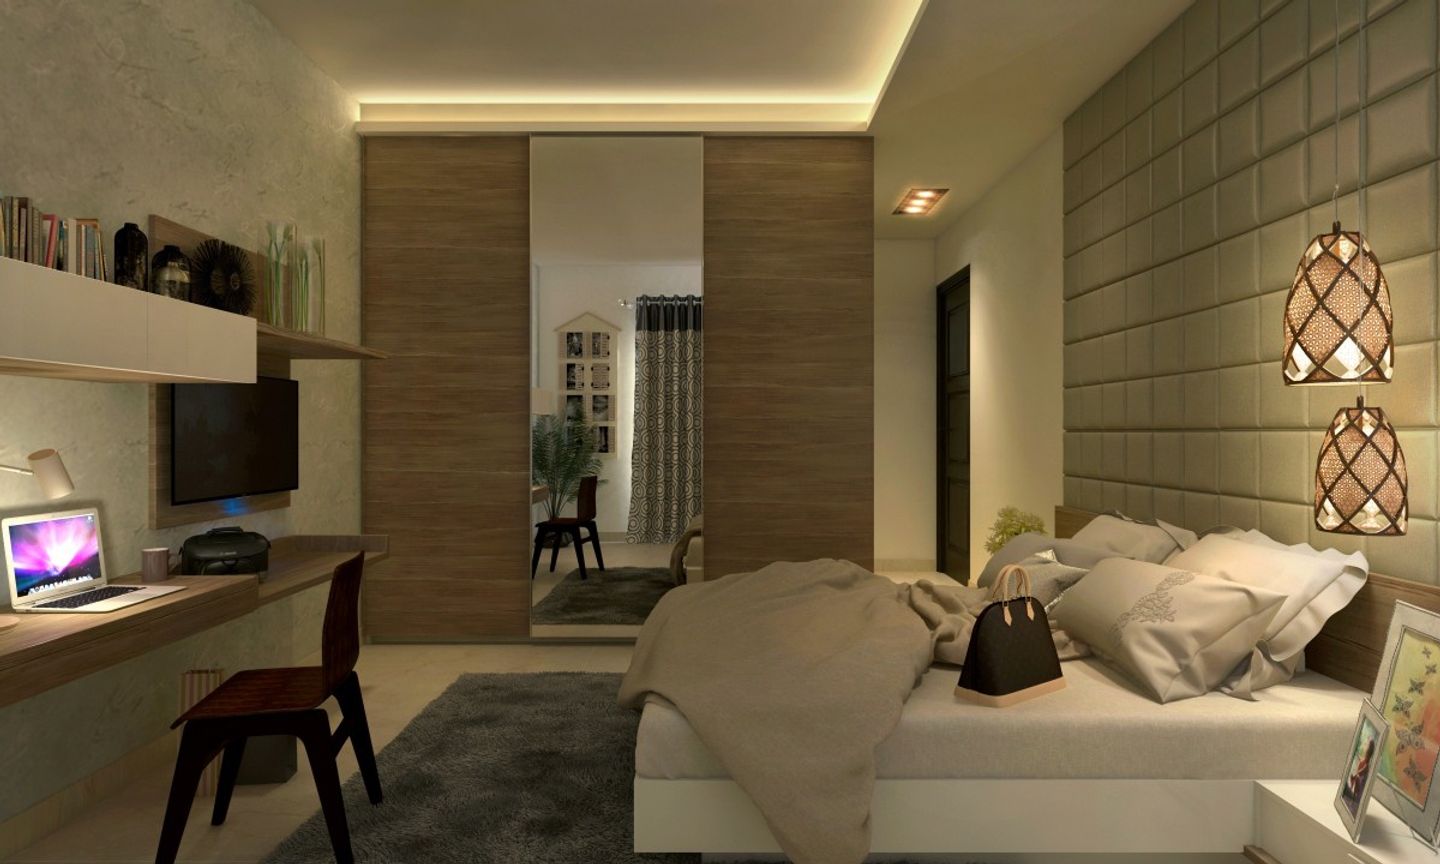 Modern Bedroom Design In Cream And Brown